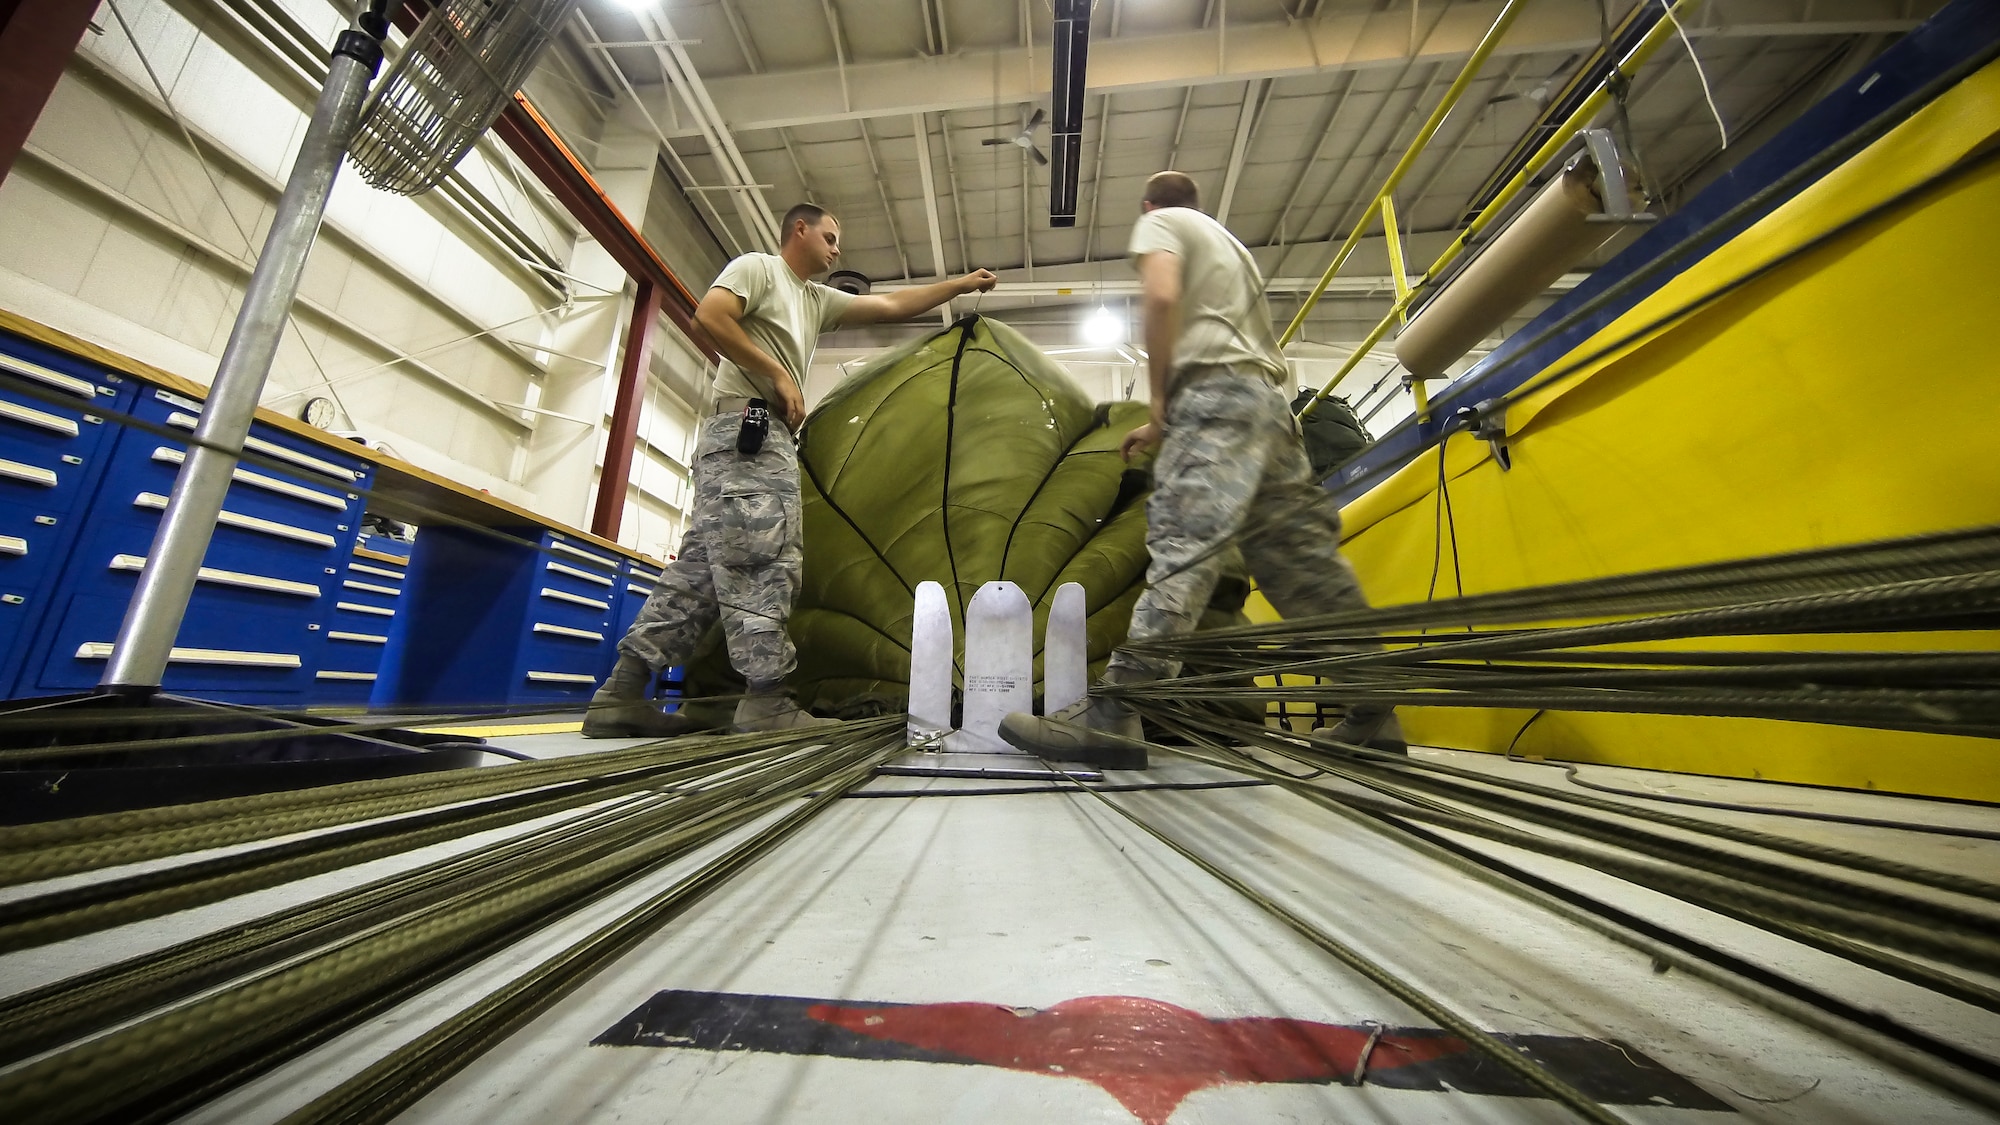 Technical Sgt. Jesse Sorrell (right) and Technical Sgt. Jeremy Martinson (left) untagle parachute cord on a G-12E Type V platform parachute after recovering it from the dropzone on June 6, 2015. The Airman from the 182d Airlift Wing, Small Air Terminal, Peoria, Ill. check and repack the parachute after it was used in a recent C-130 air drop training mission with heavy equipment at the dropzone. (U.S. Air National Guard photo by Master Sgt. Scott Thompson/Released)